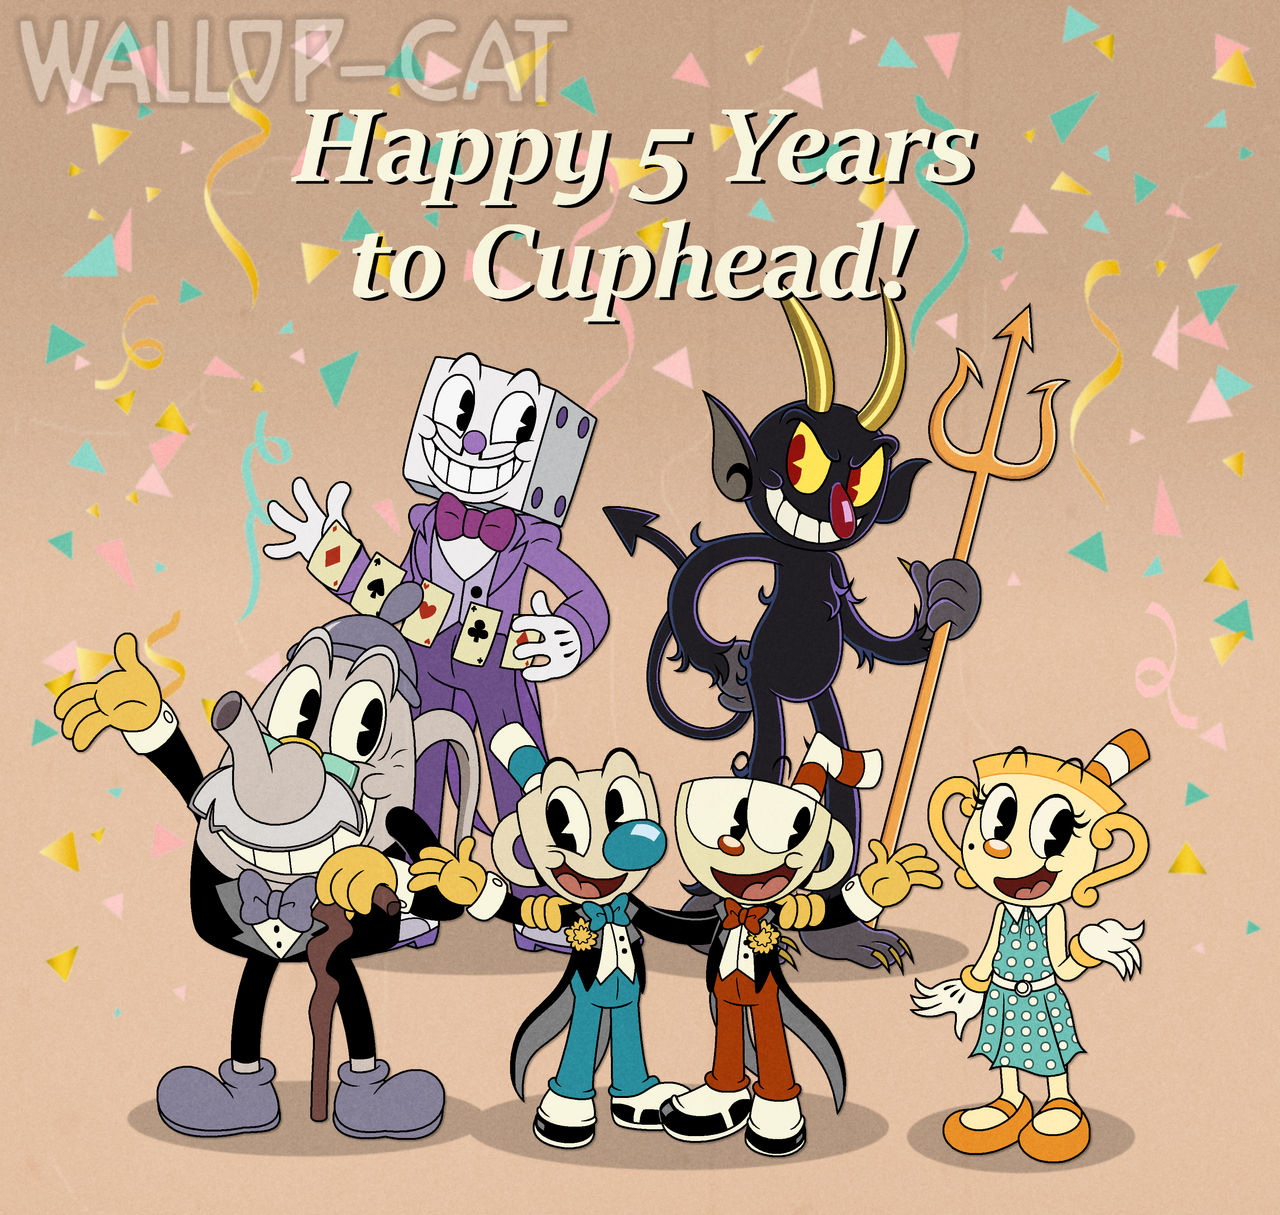 Welcome to the Cuphead Show! : . by GamingGoru on DeviantArt